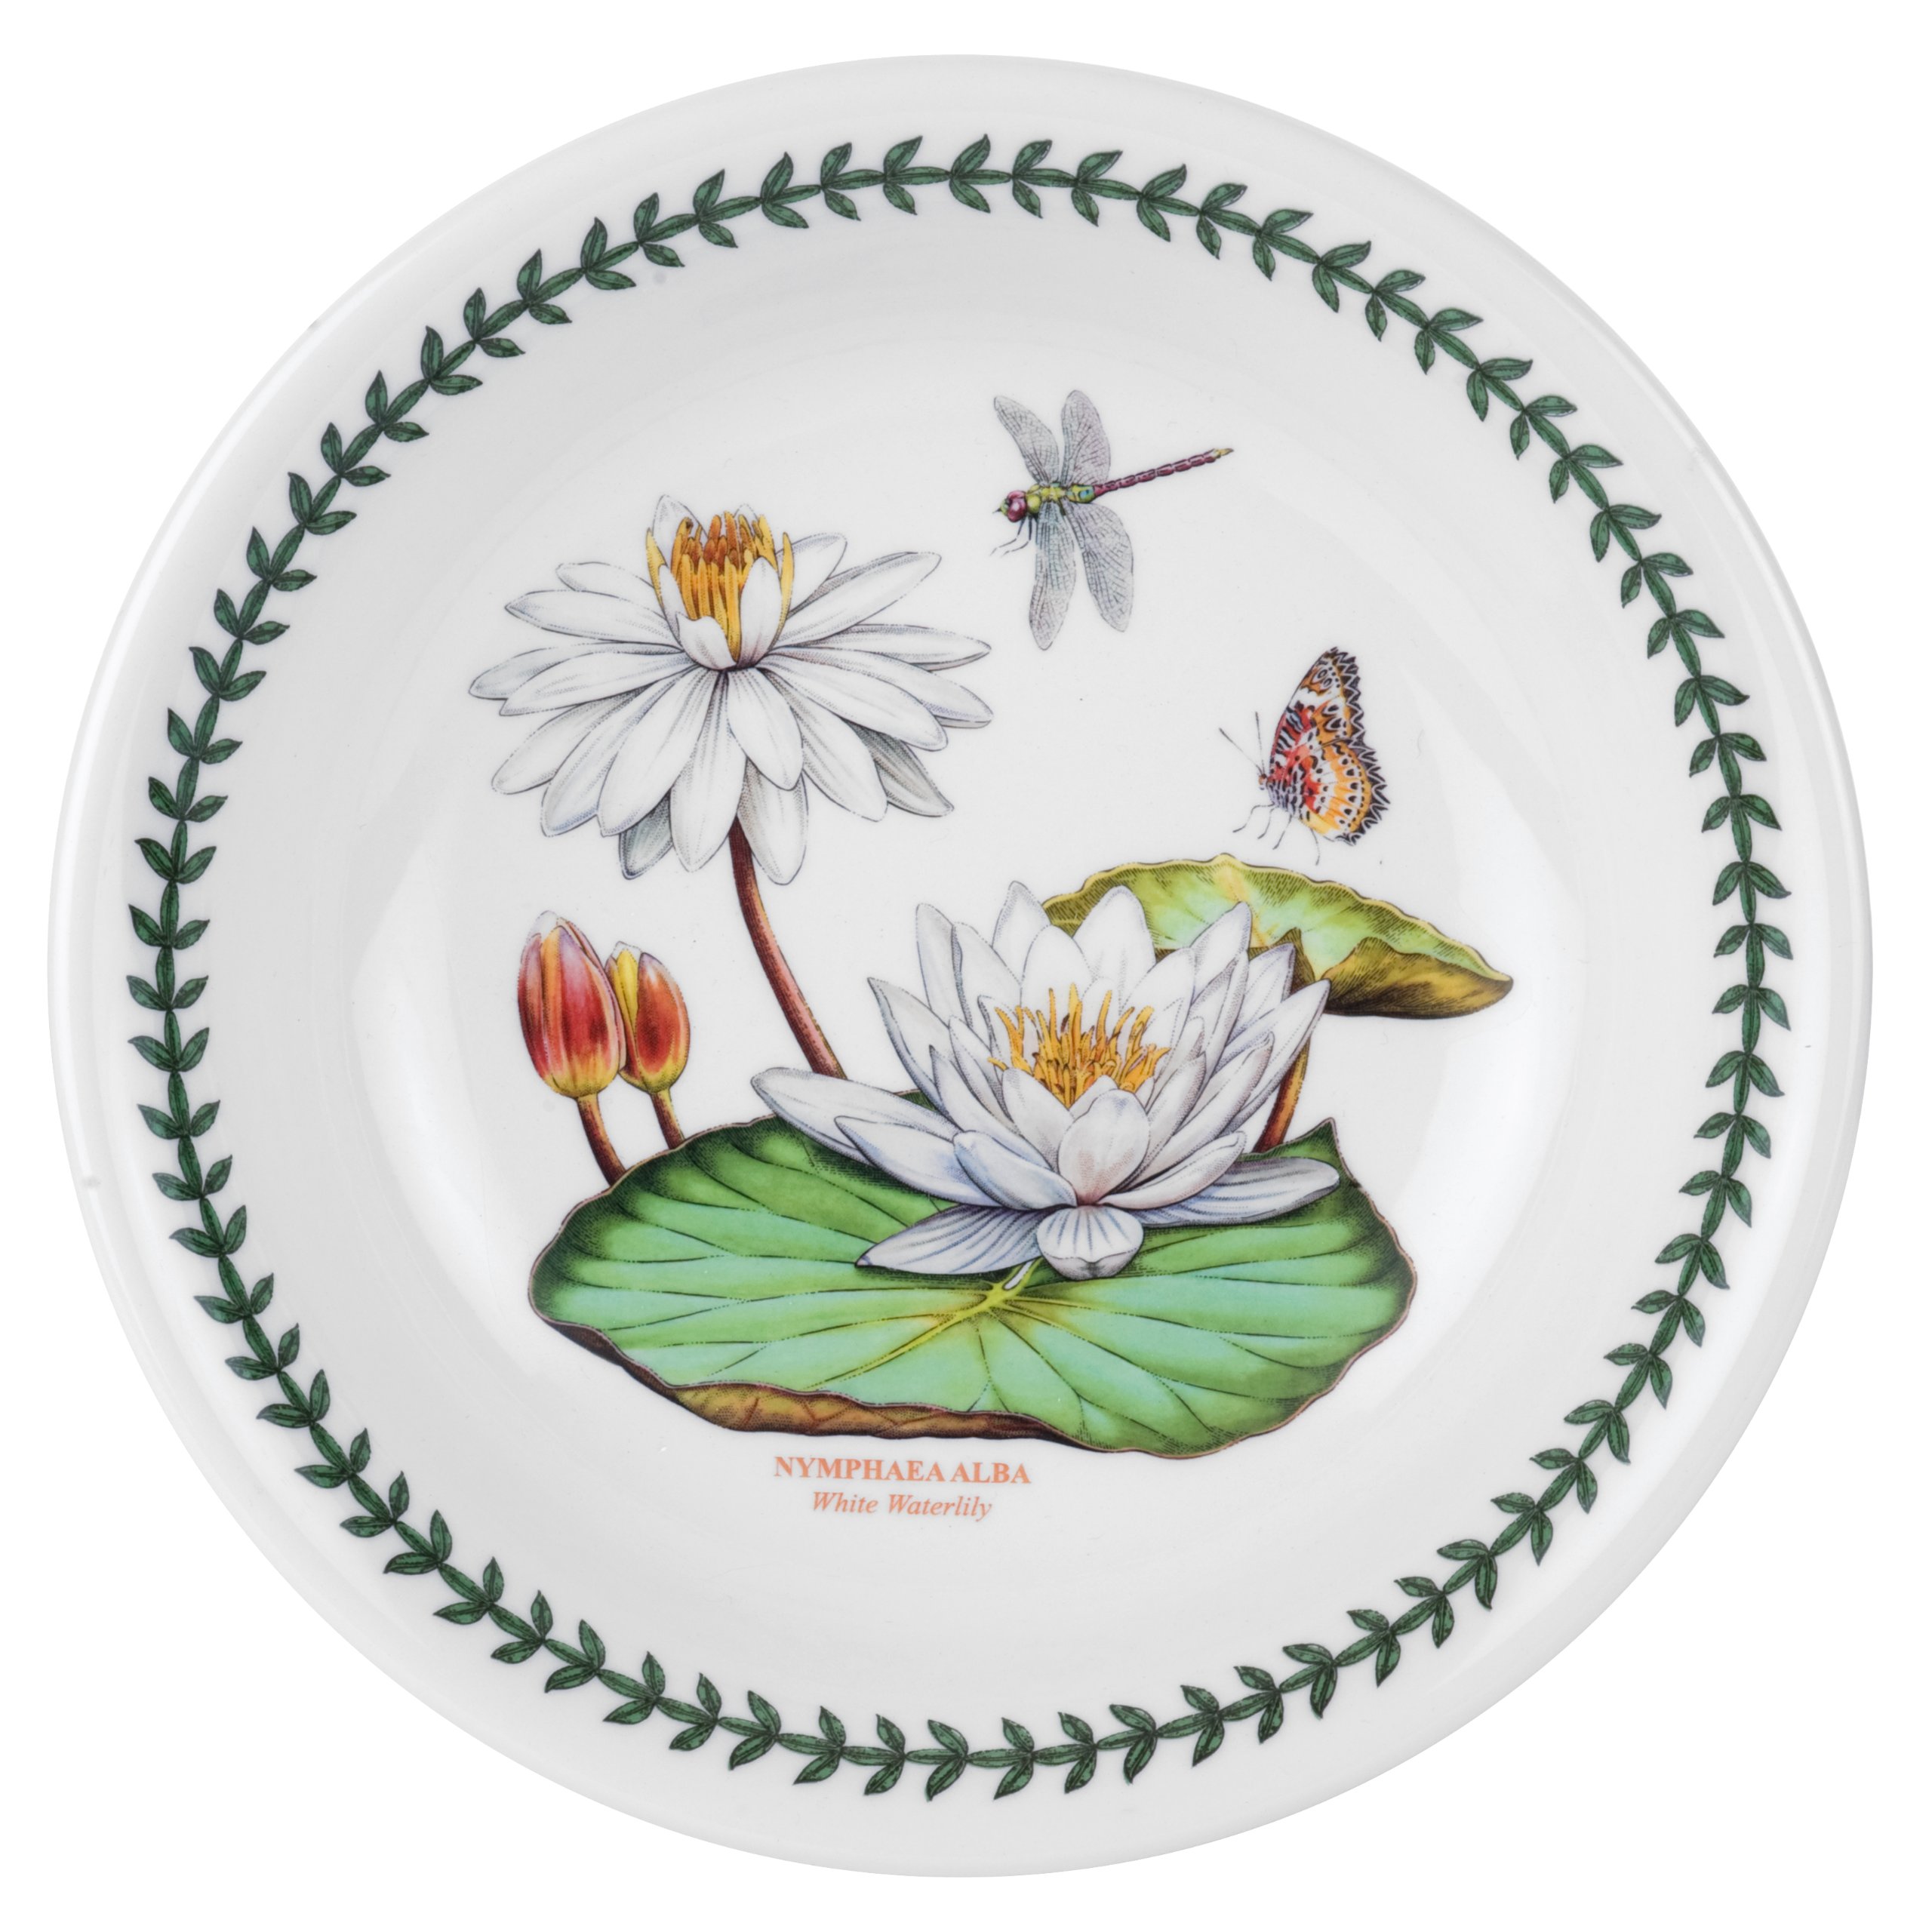 Portmeirion Exotic Botanic Garden 8.5 Inch Pasta Bowl with White Water Lily Motif | Dishwasher, Microwave, and Oven Safe | For Pasta, Soups, and Salads | Made in England